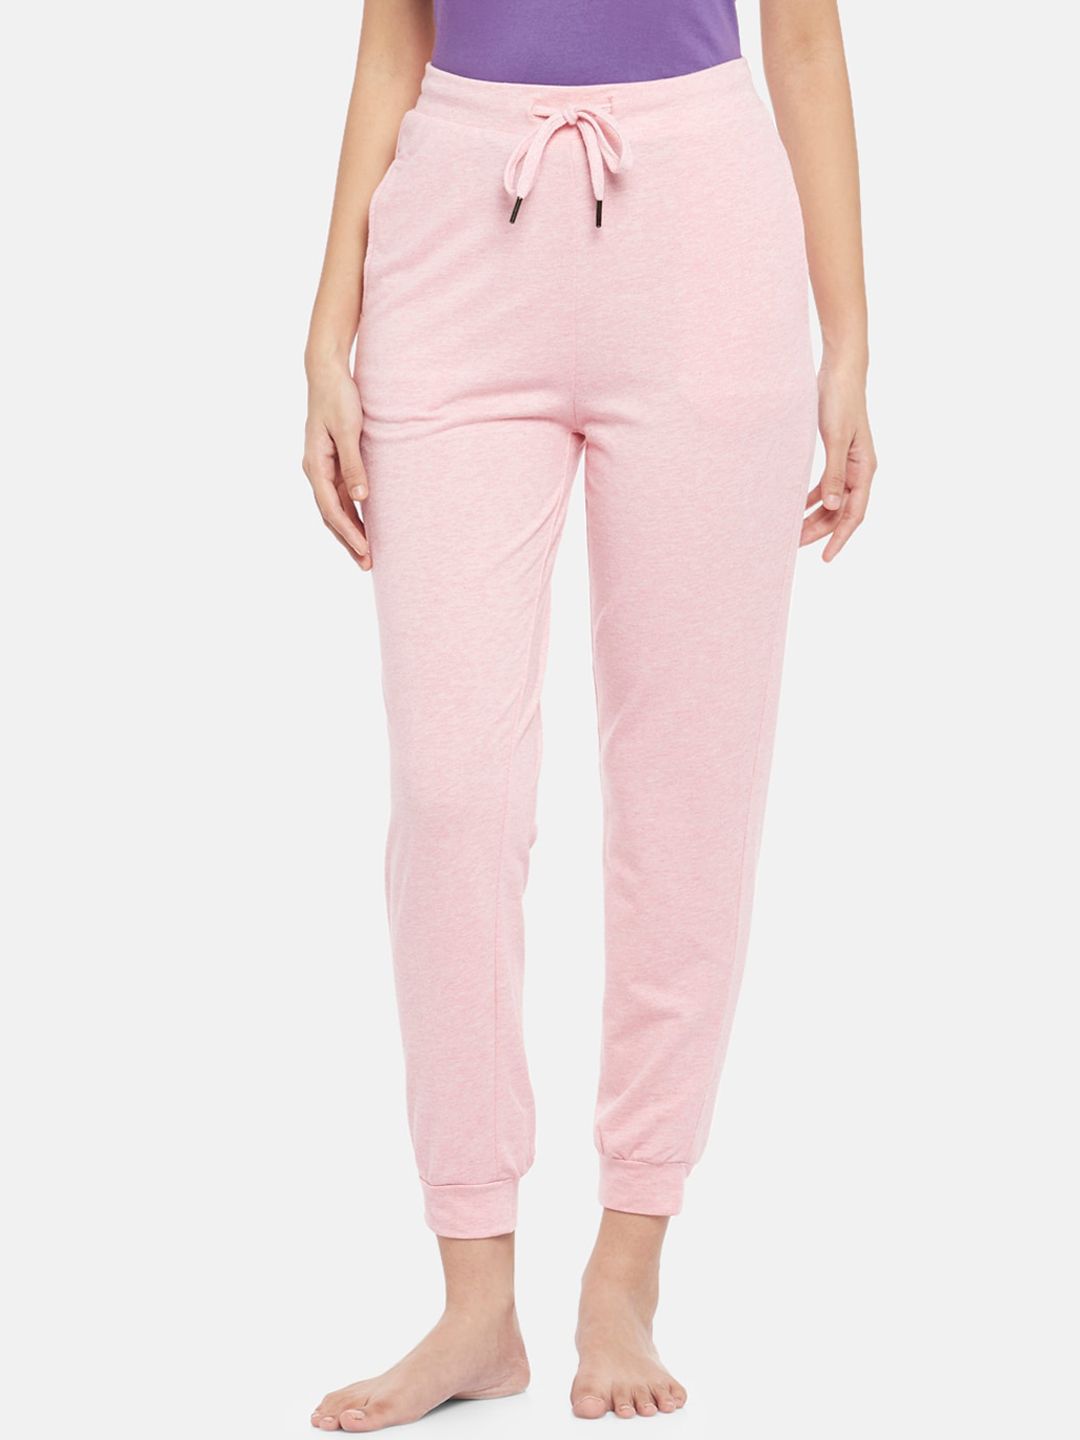 Dreamz by Pantaloons Women Peach Knitted Lounge Pants Price in India